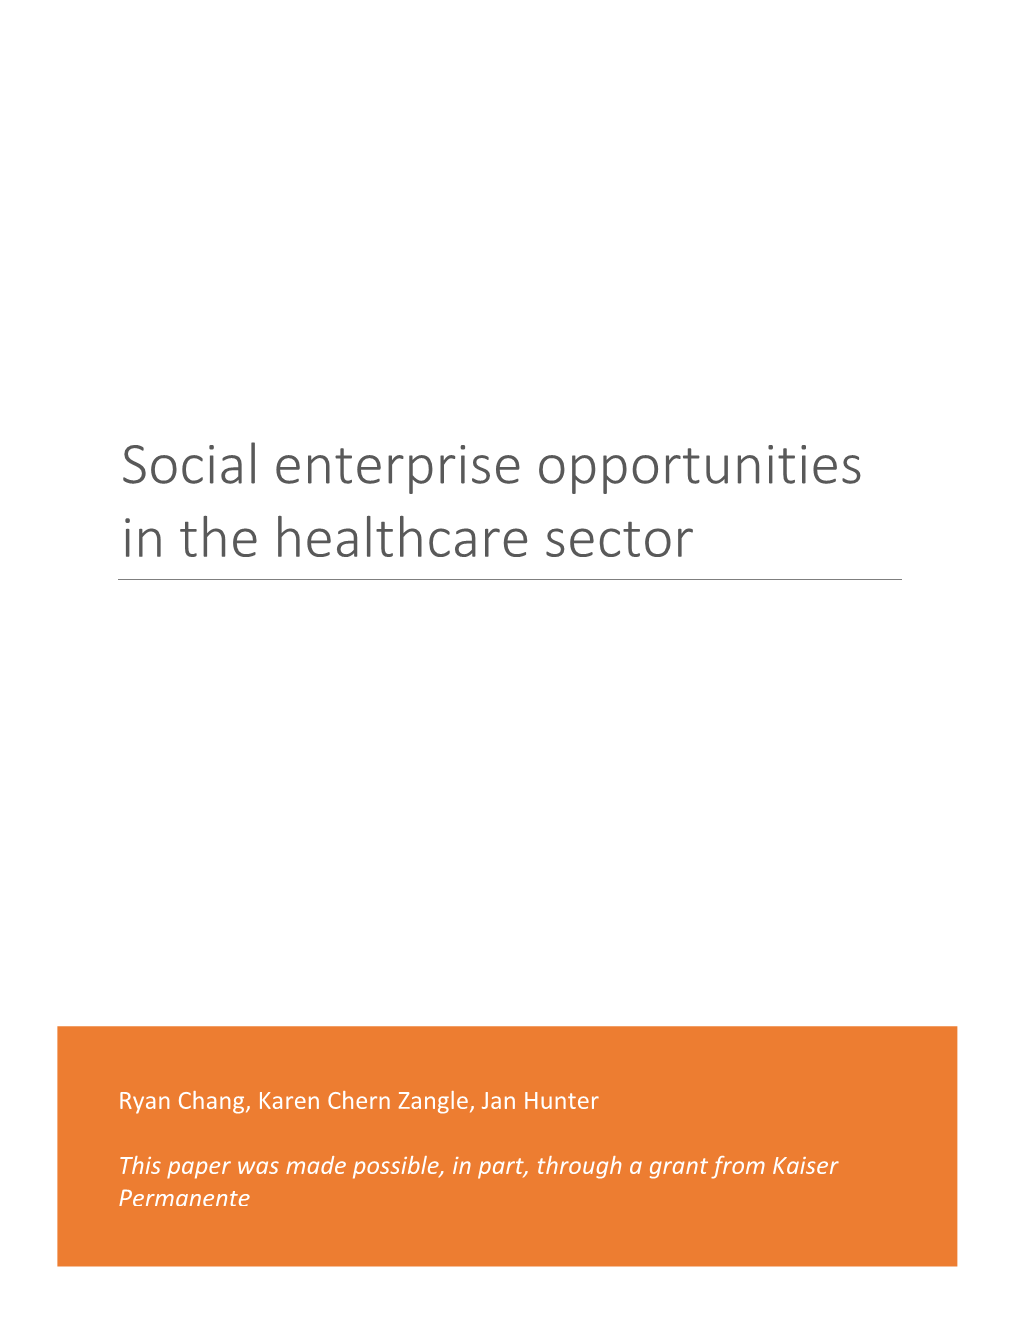 Social Enterprise Opportunities in the Healthcare Sector